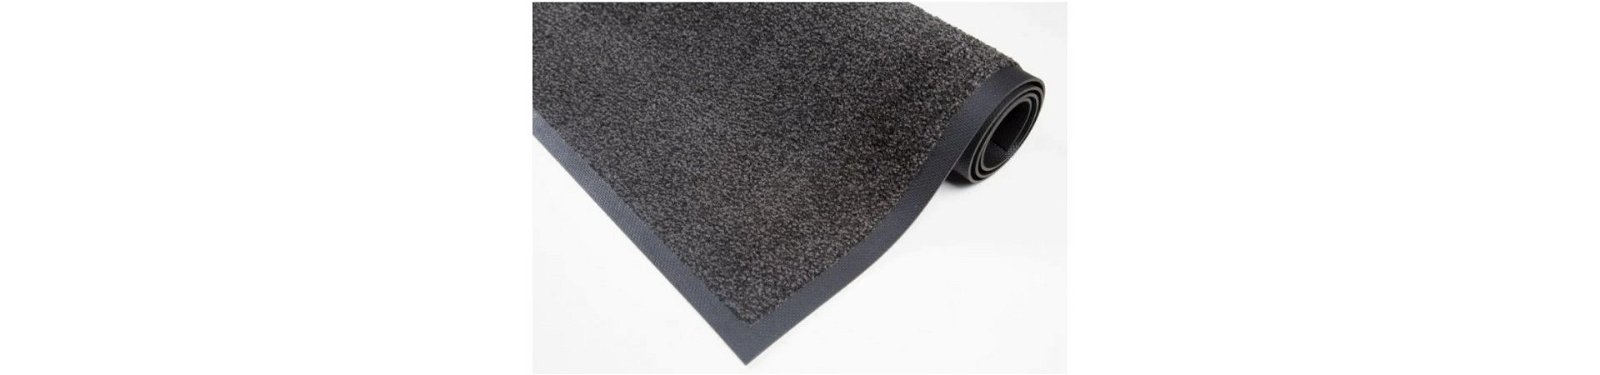 Gummed entrance mats, ready-made and different colors to size, order here